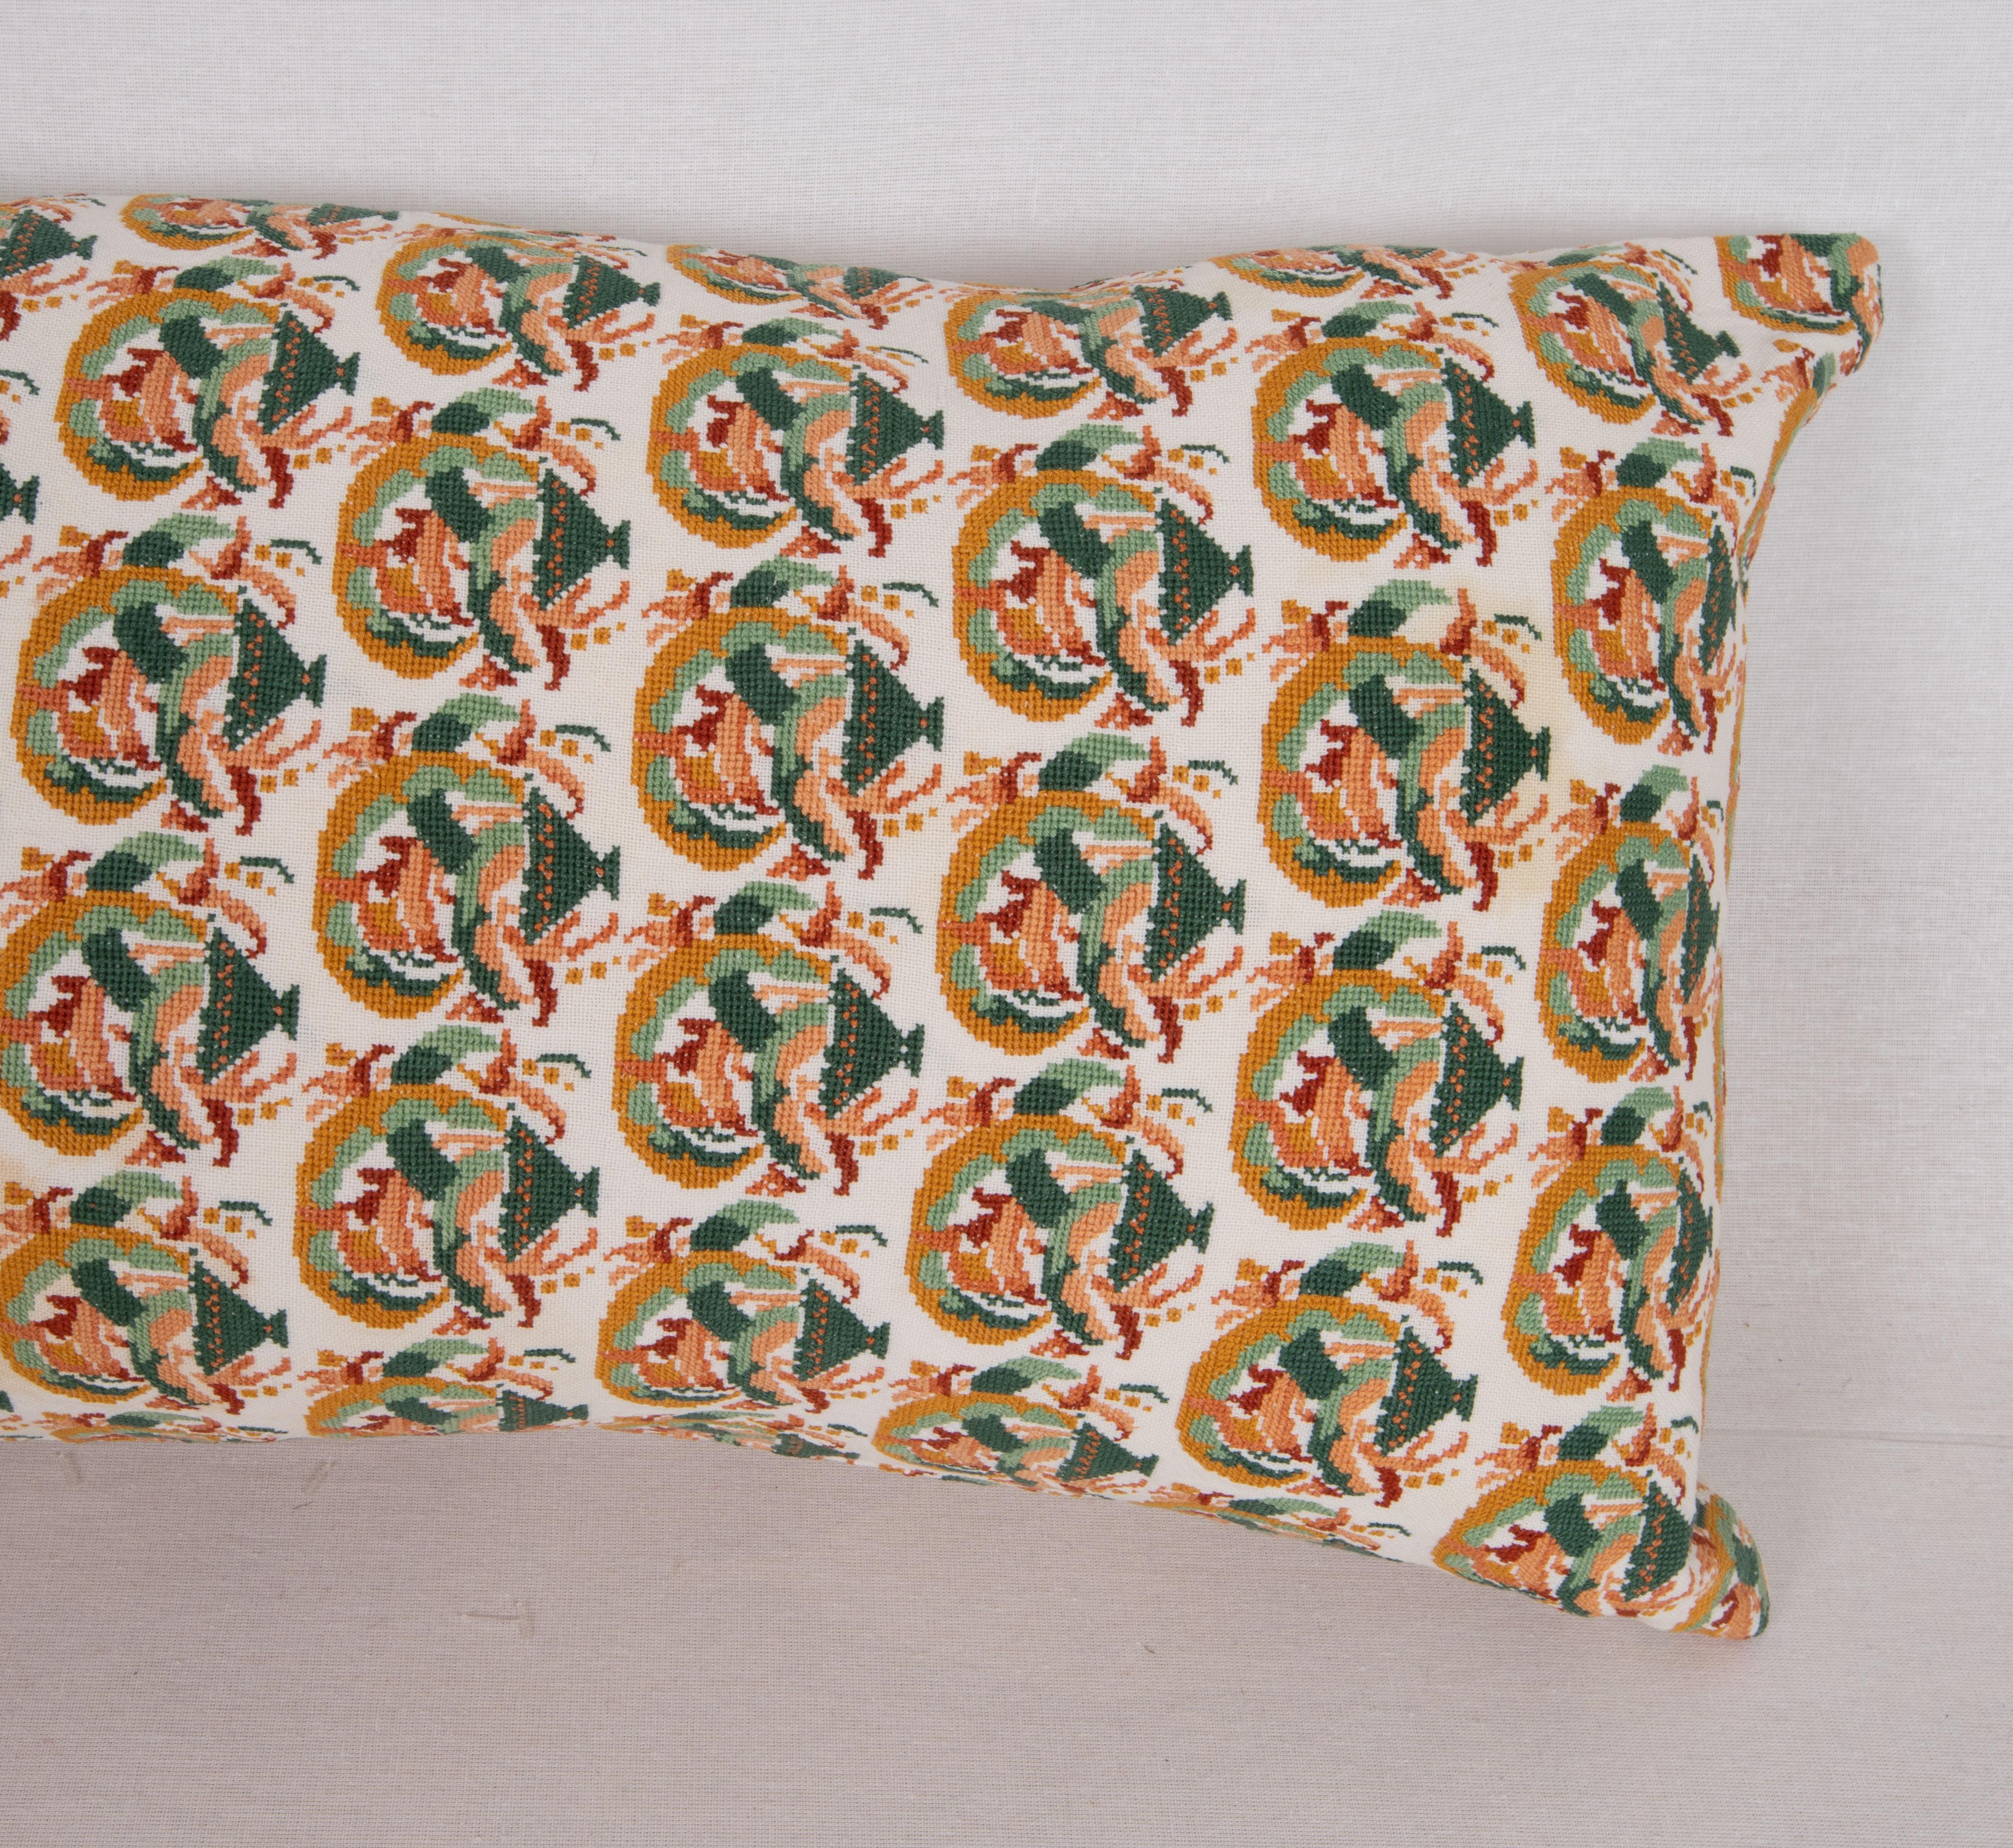 Embroidered Antique Pillow Cover from Eastern Europe with Fine Embroidery, Early 20th C For Sale